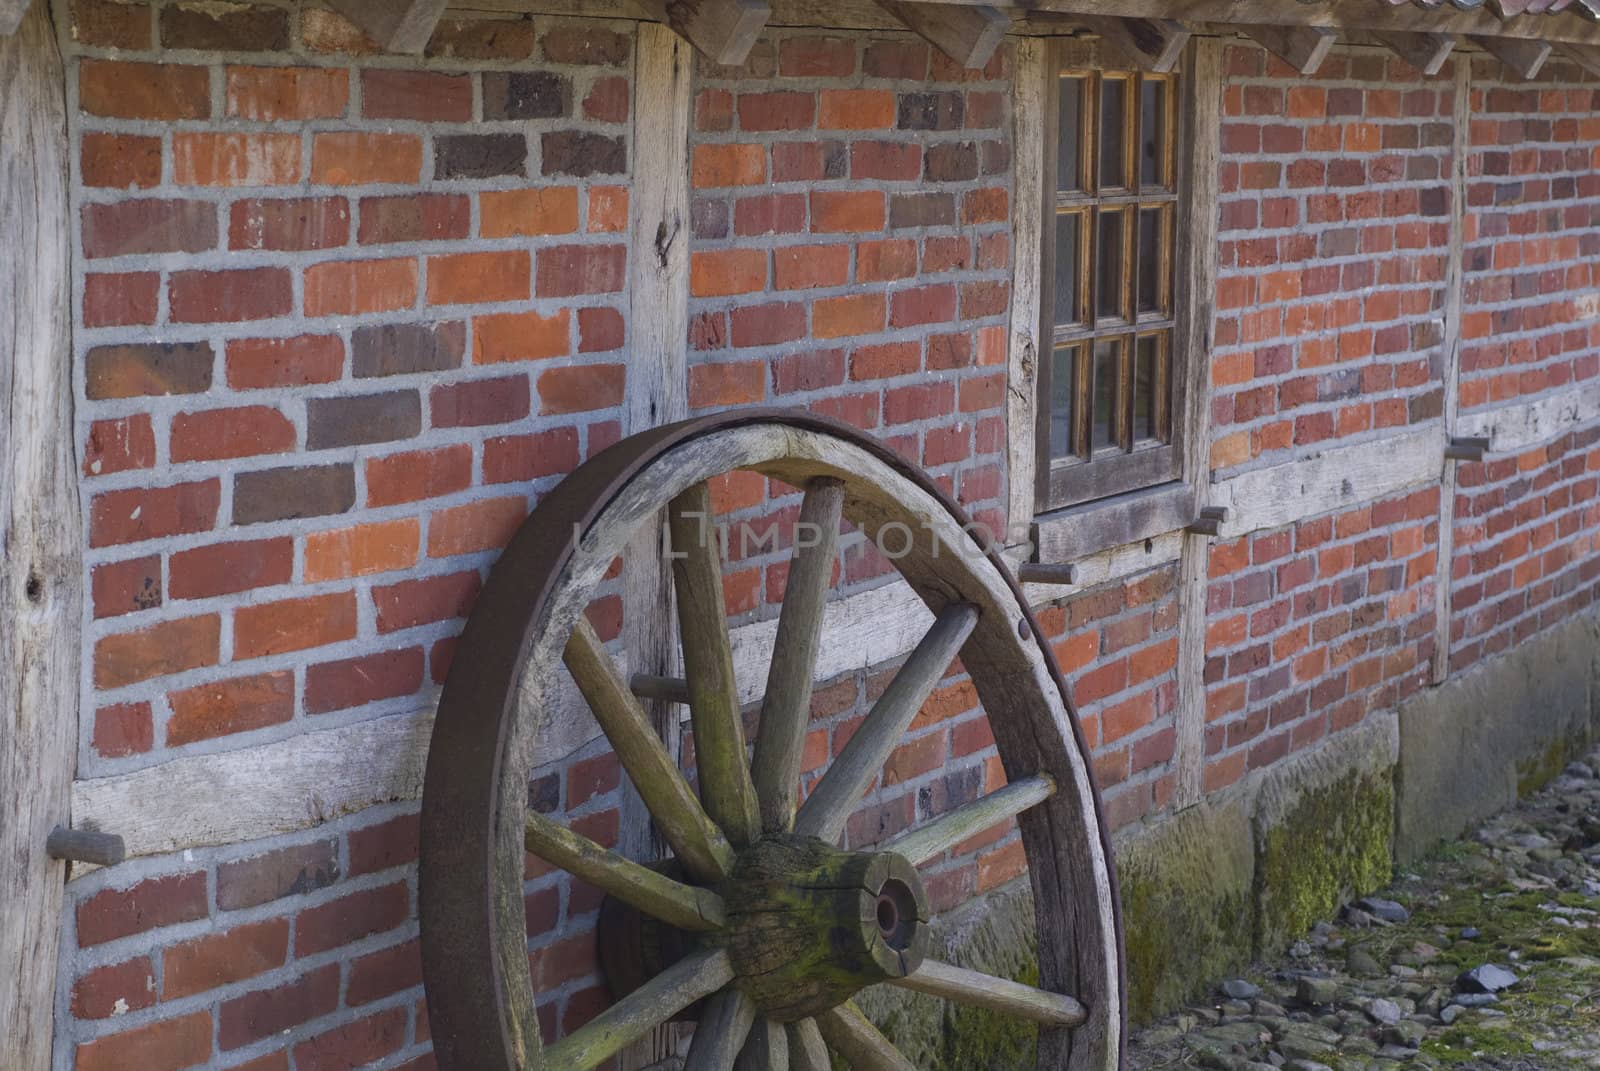 Part of an old wooden wheel in front of an ancient farm.